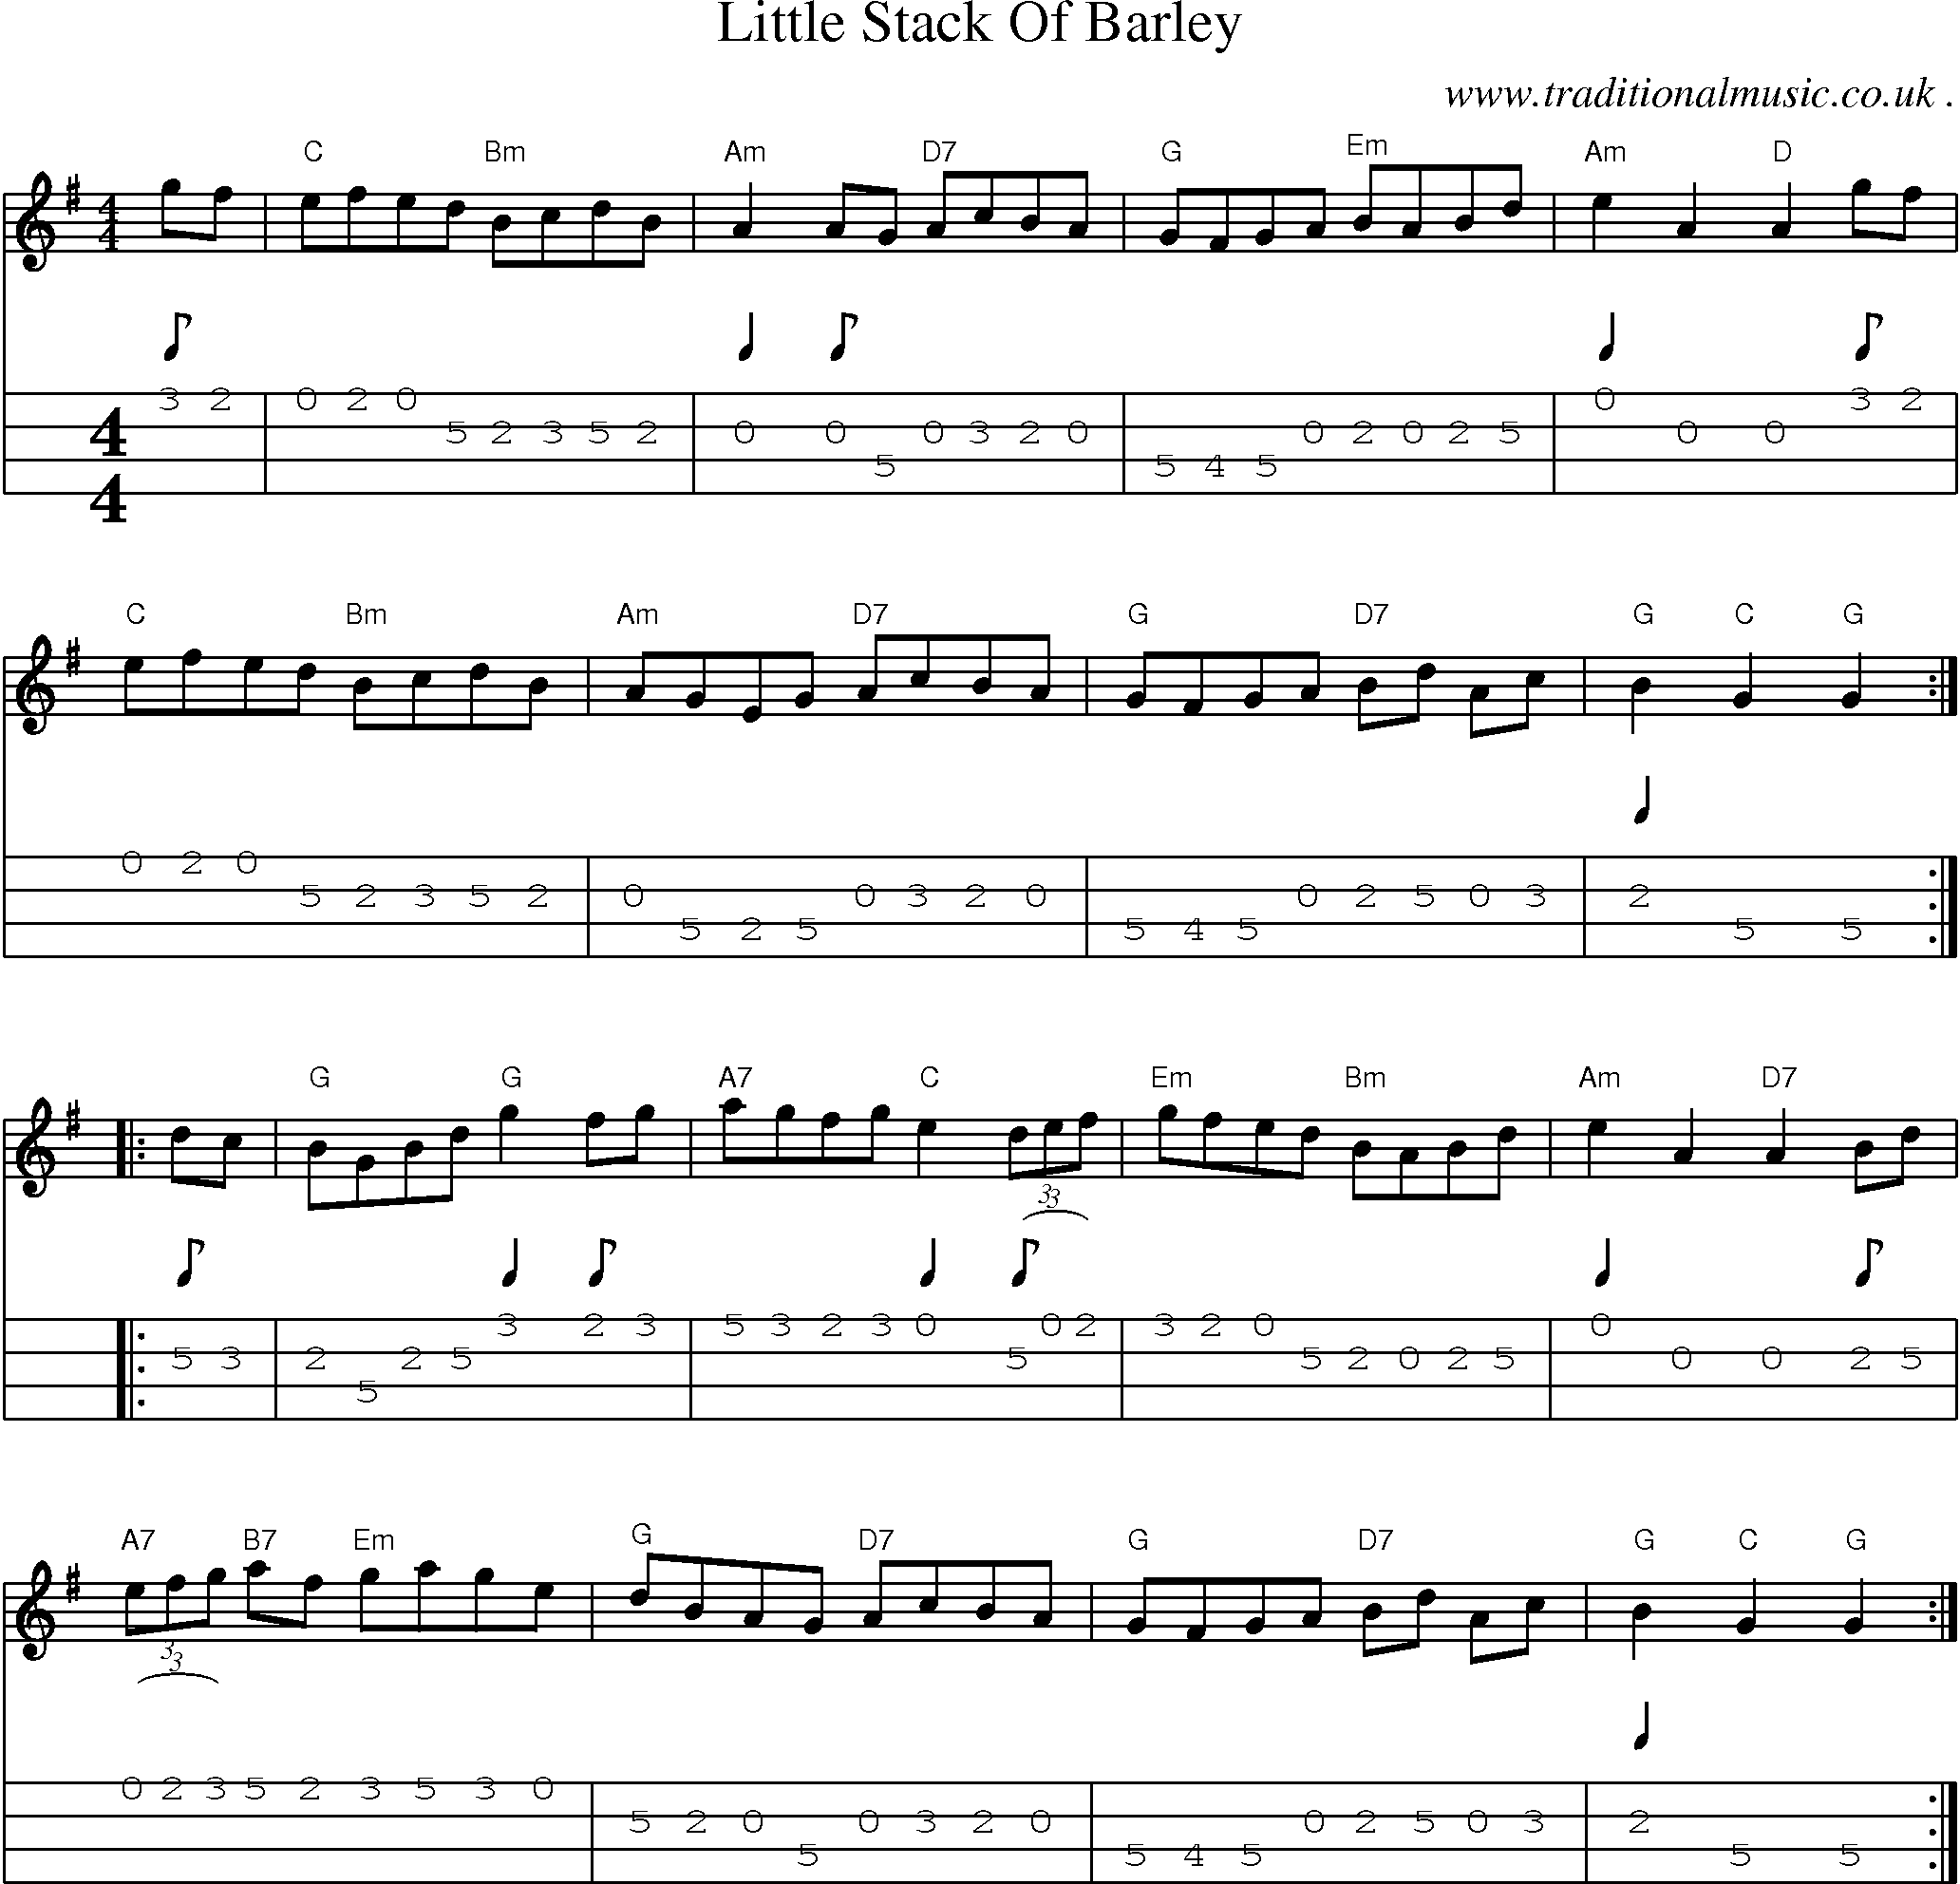 Music Score and Guitar Tabs for Little Stack Of Barley